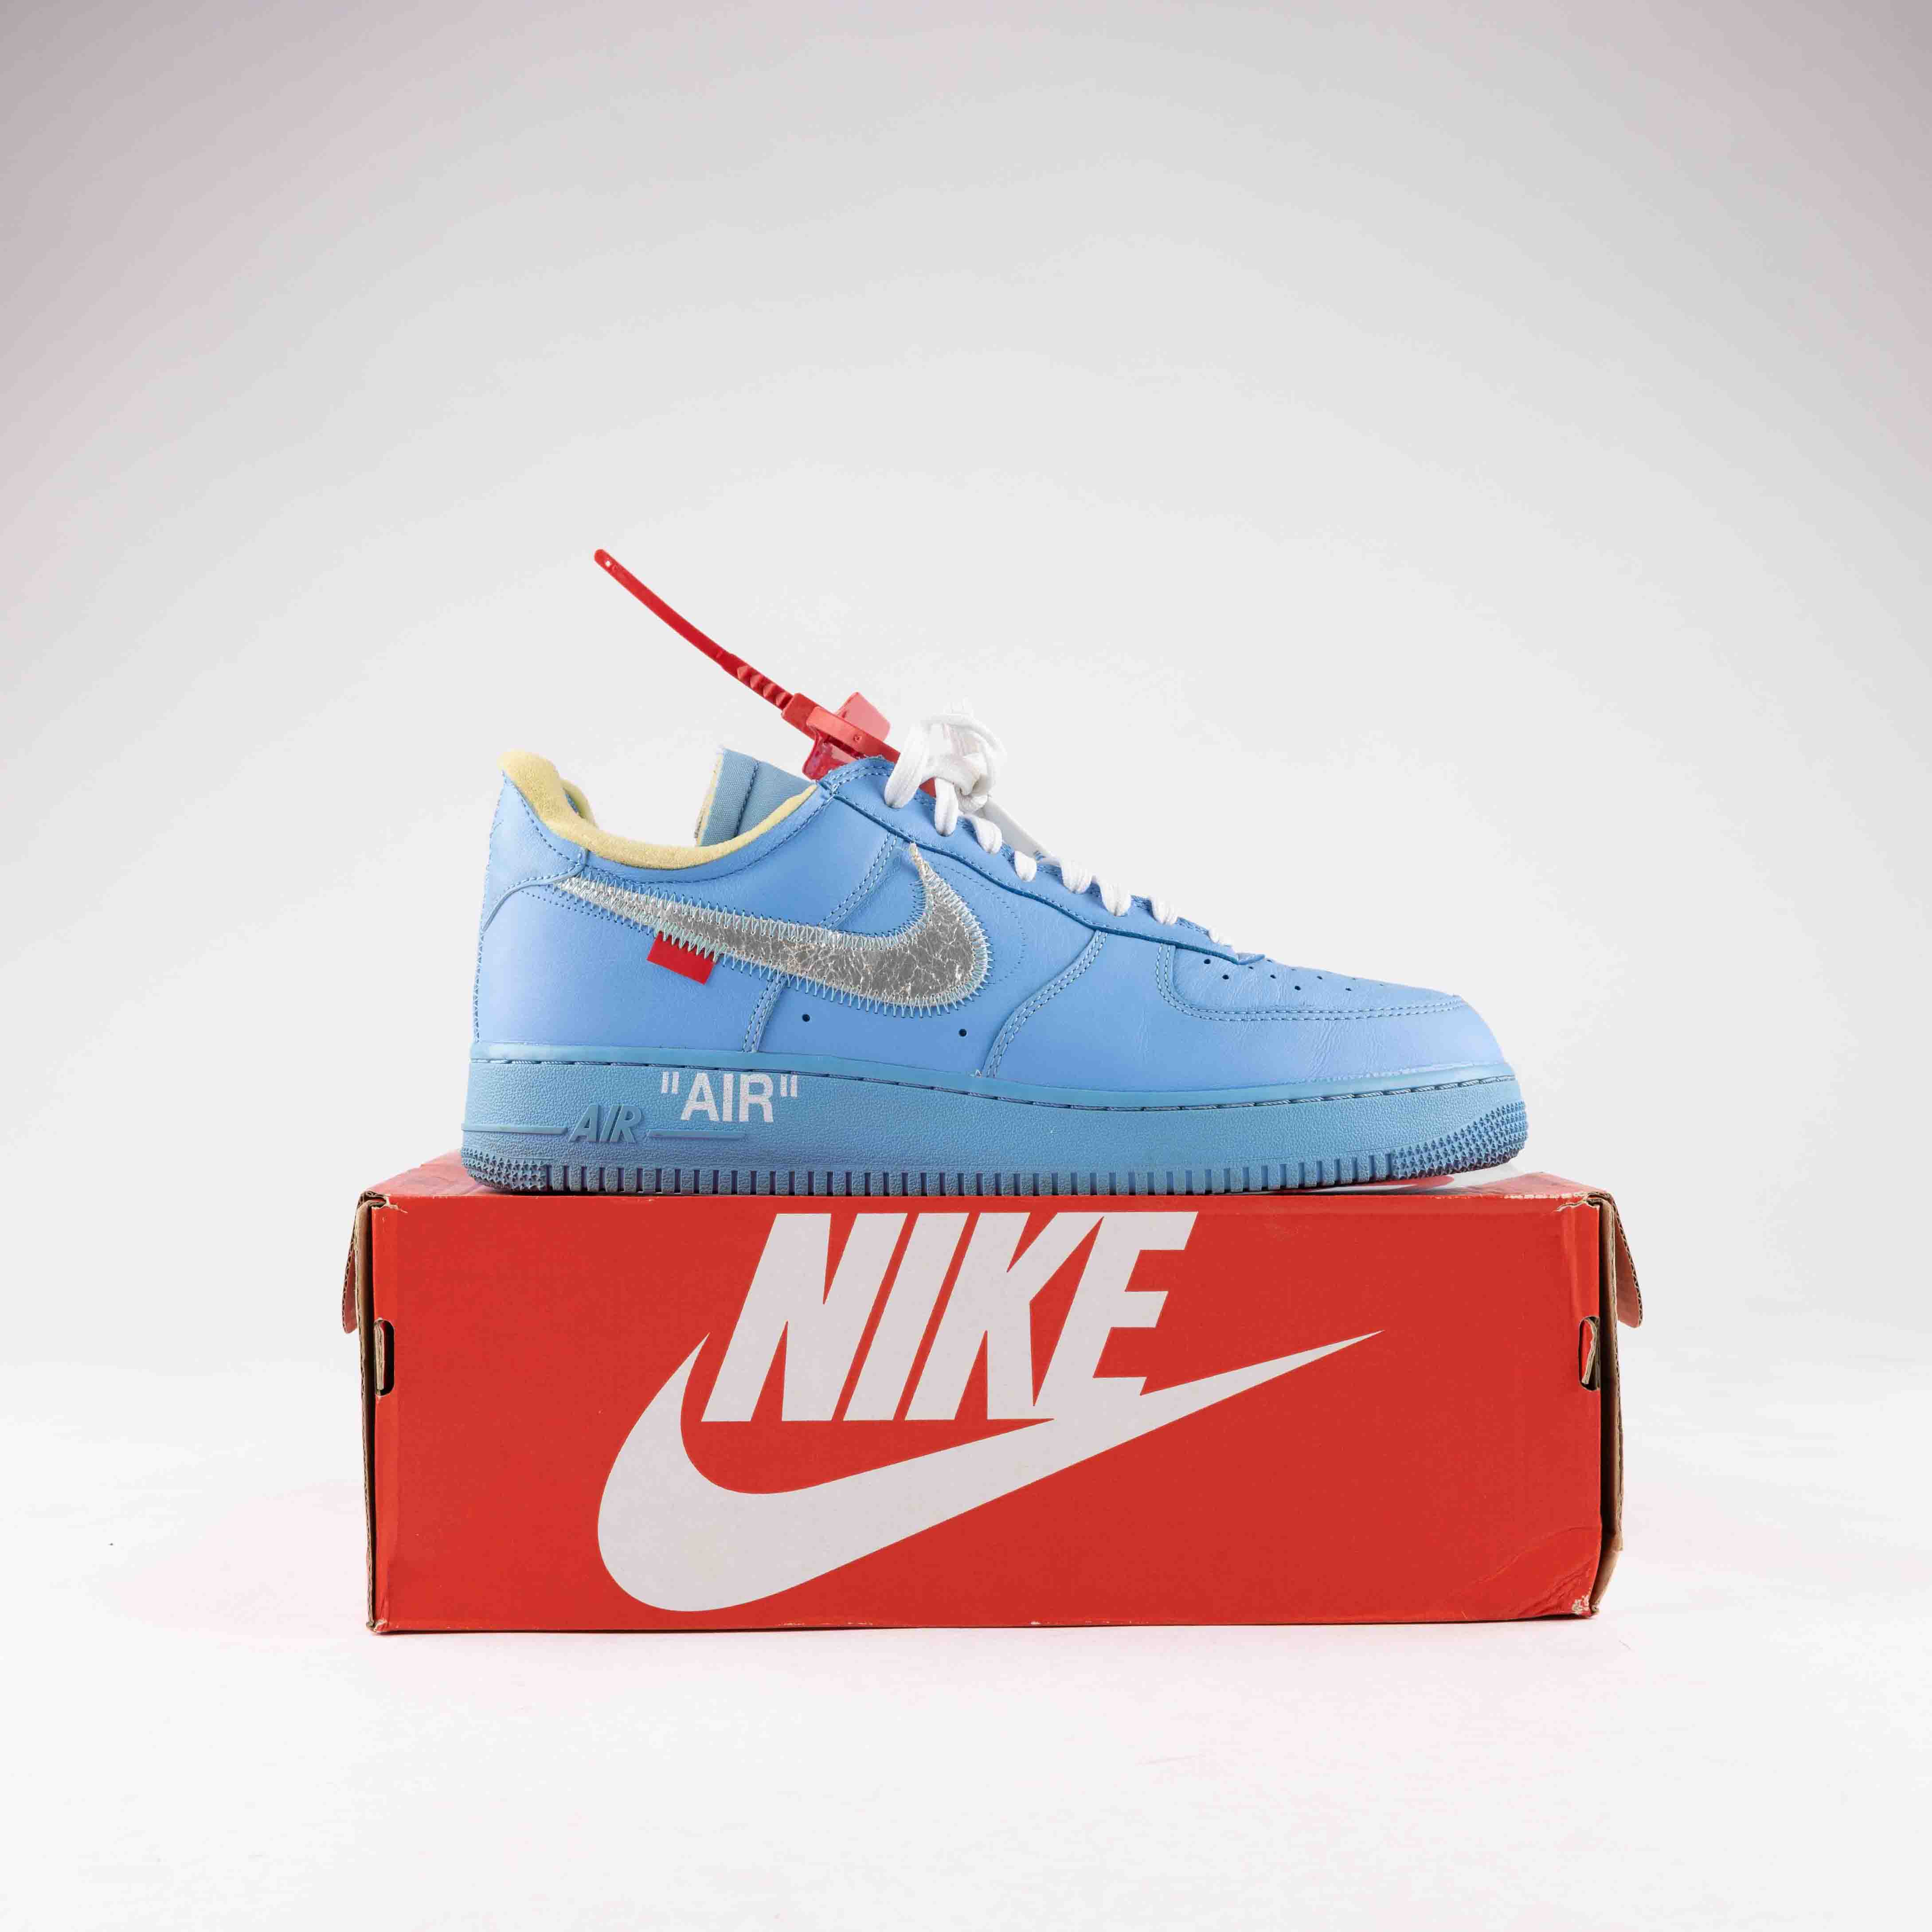 DROP 10 - 10 Days of Grails - Nike Air Force 1 Low Off-White MCA University  Blue (Used) Rep Bo